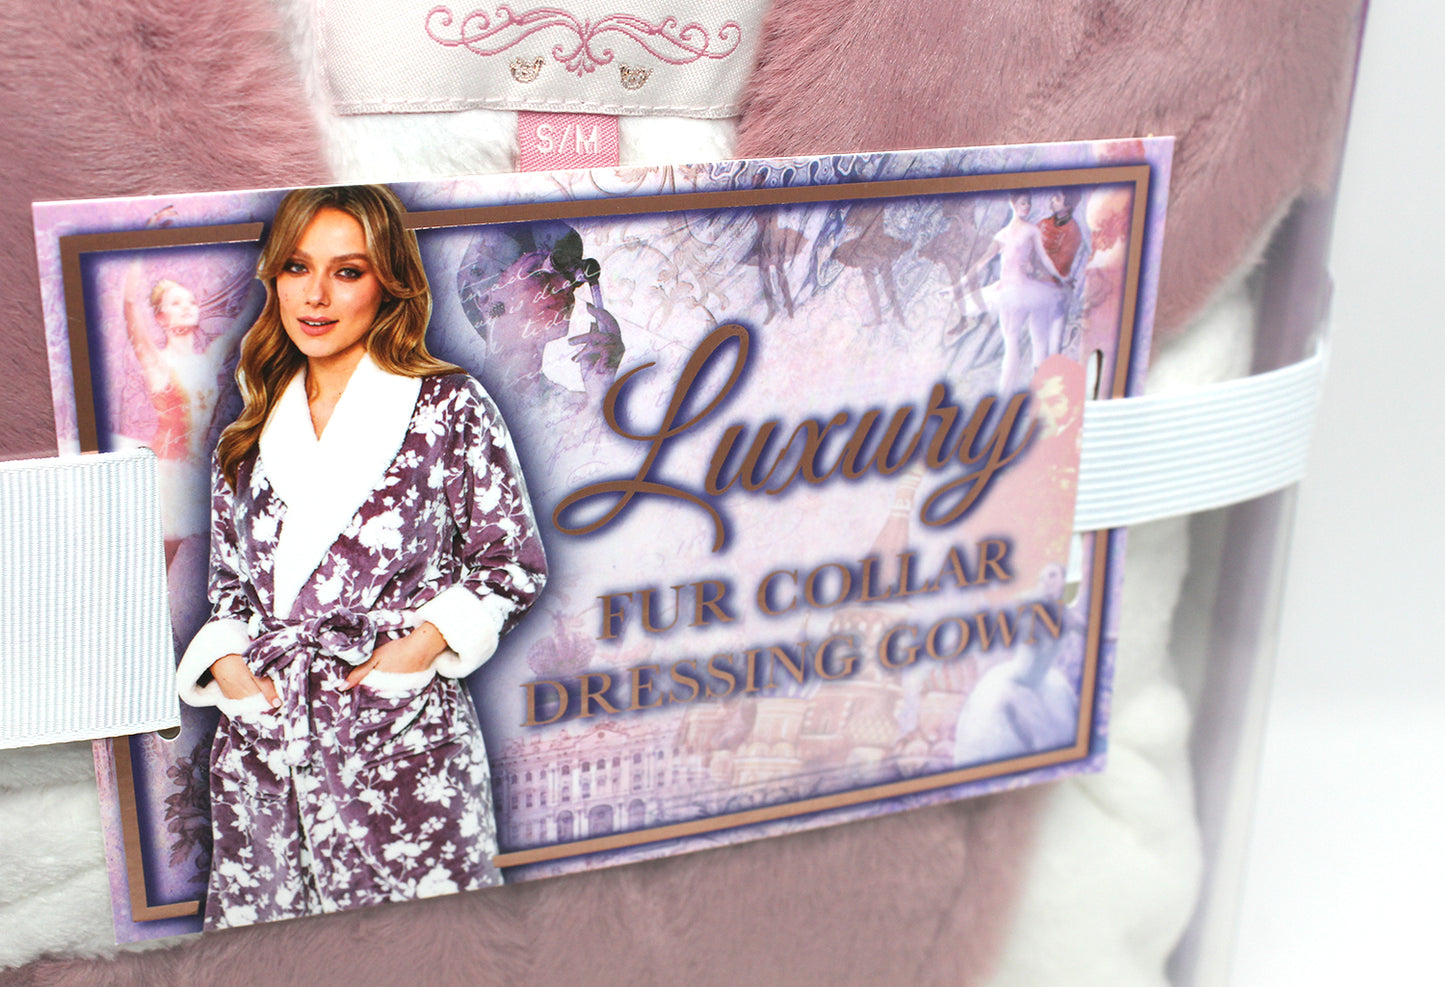 Fur Collar Dressing Gown in Mauve and Cream